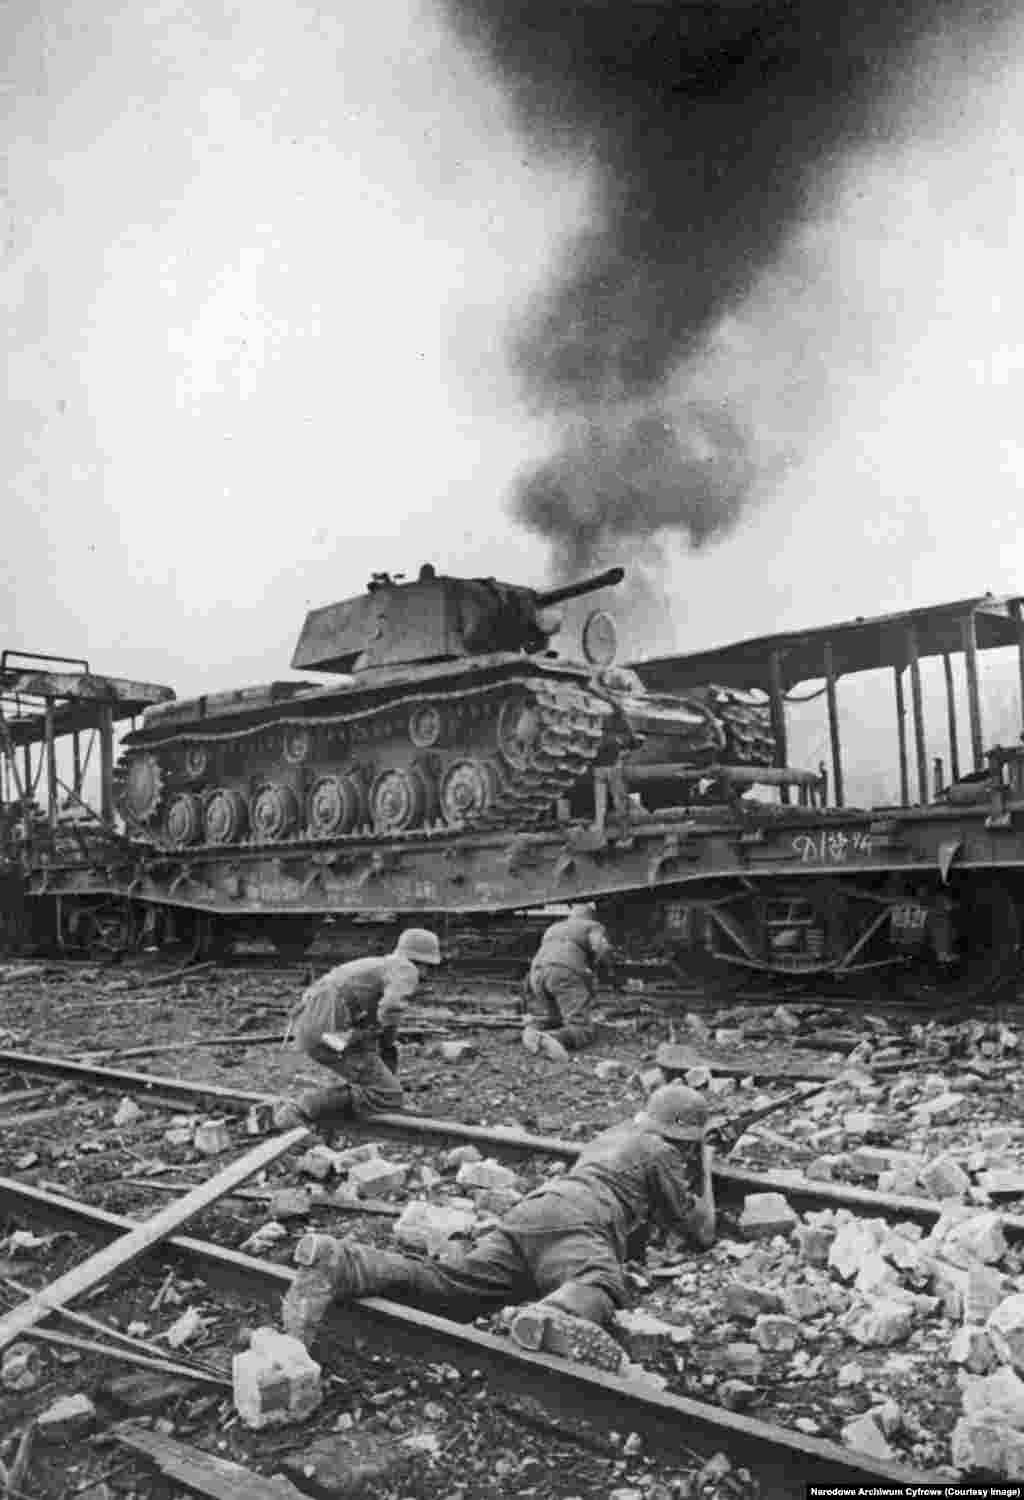 Nazi troops engage in a firefight on the Moscow-Smolensk railway in August 1941. A Soviet KV-1 tank is caught in the middle of the shoot-out. &nbsp; Despite Hitler&#39;s prediction of a swift capture of Moscow and Leningrad (now St. Petersburg), Nazi troops soon faced ferocious resistance and were unable to capture either city.